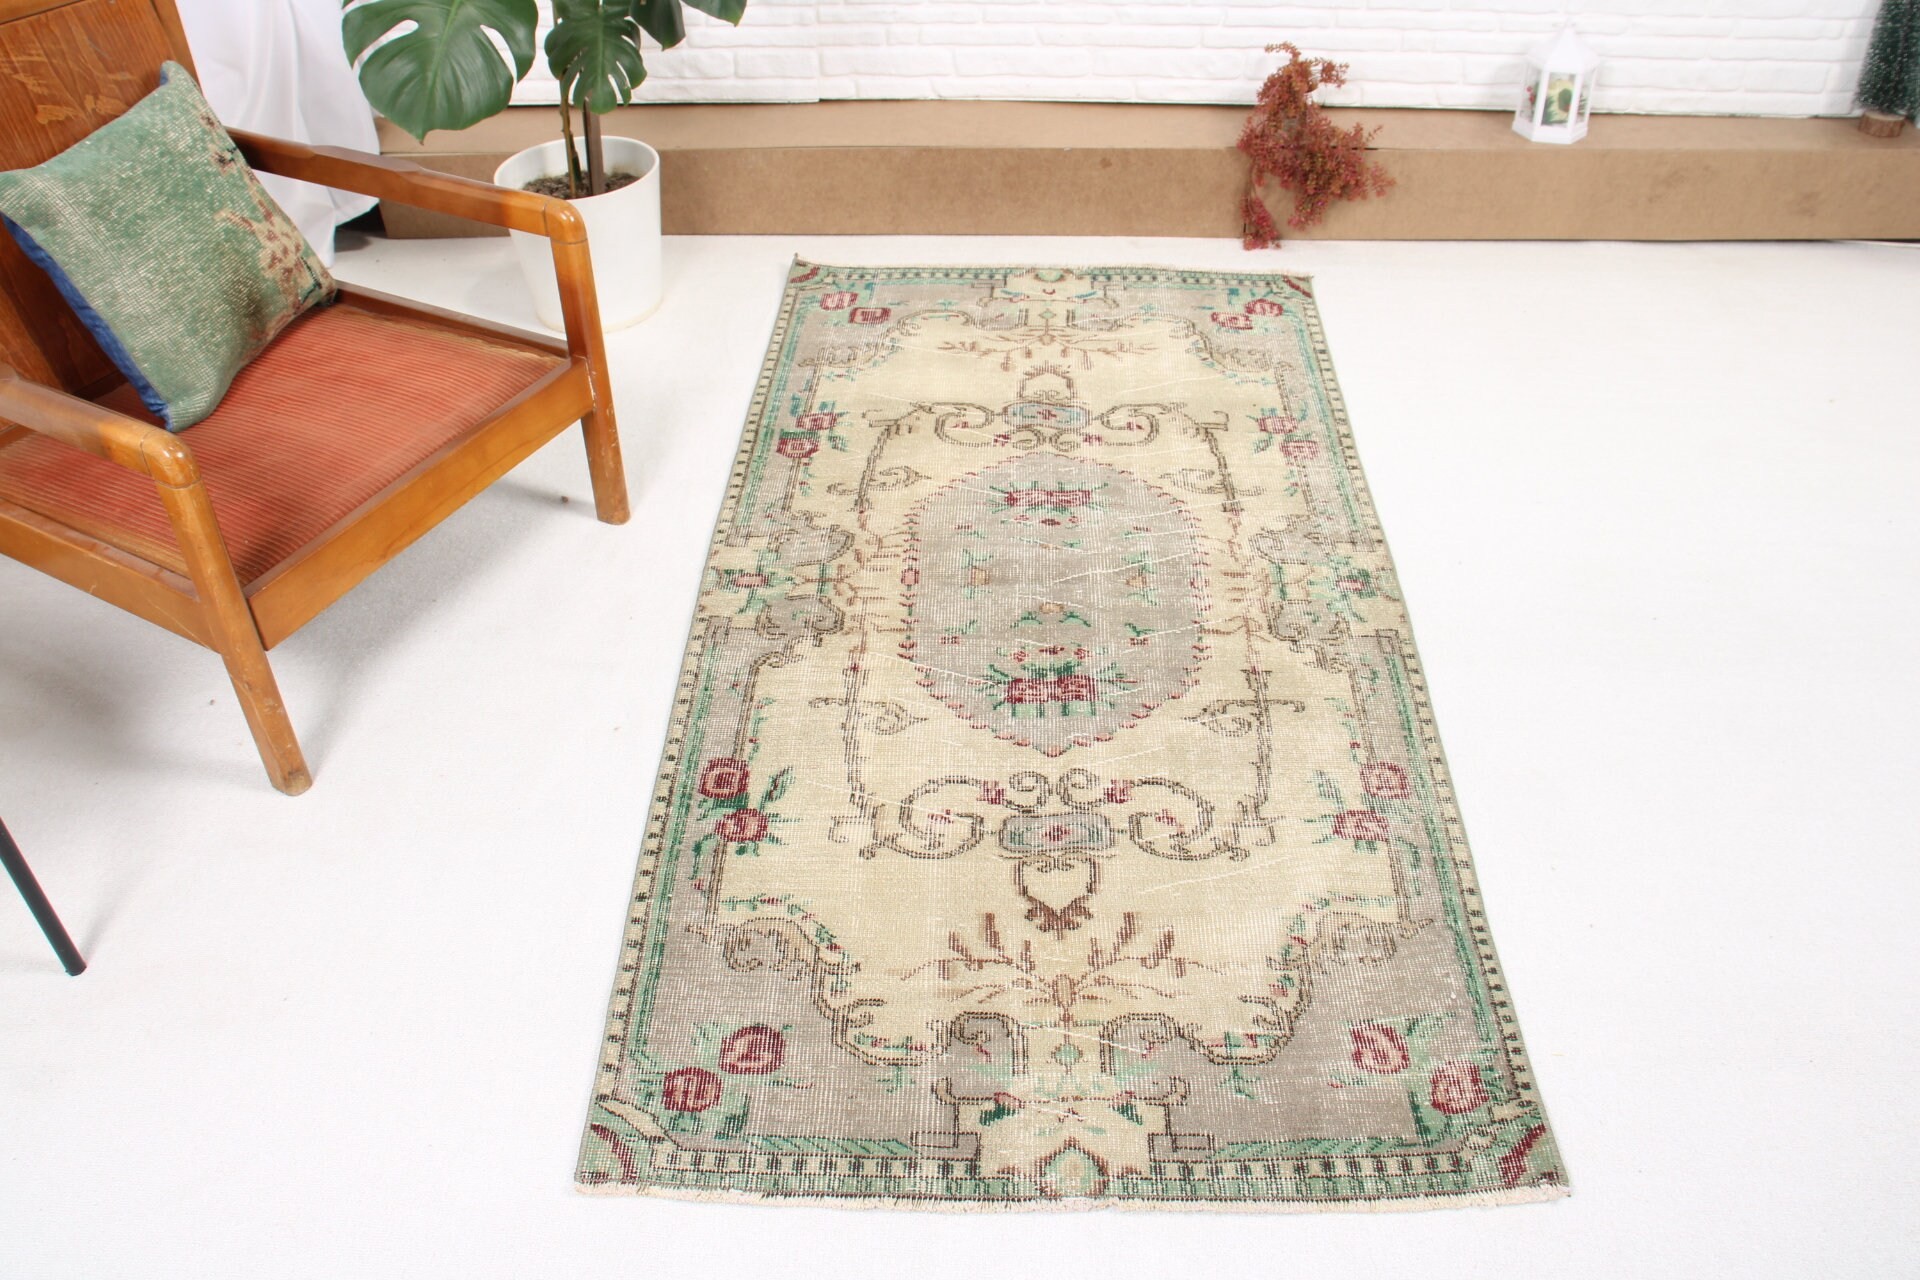 3.1x6.2 ft Accent Rug, Old Rug, Beige Bedroom Rugs, Turkish Rugs, Kitchen Rugs, Vintage Rug, Eclectic Rug, Anatolian Rugs, Rugs for Bedroom